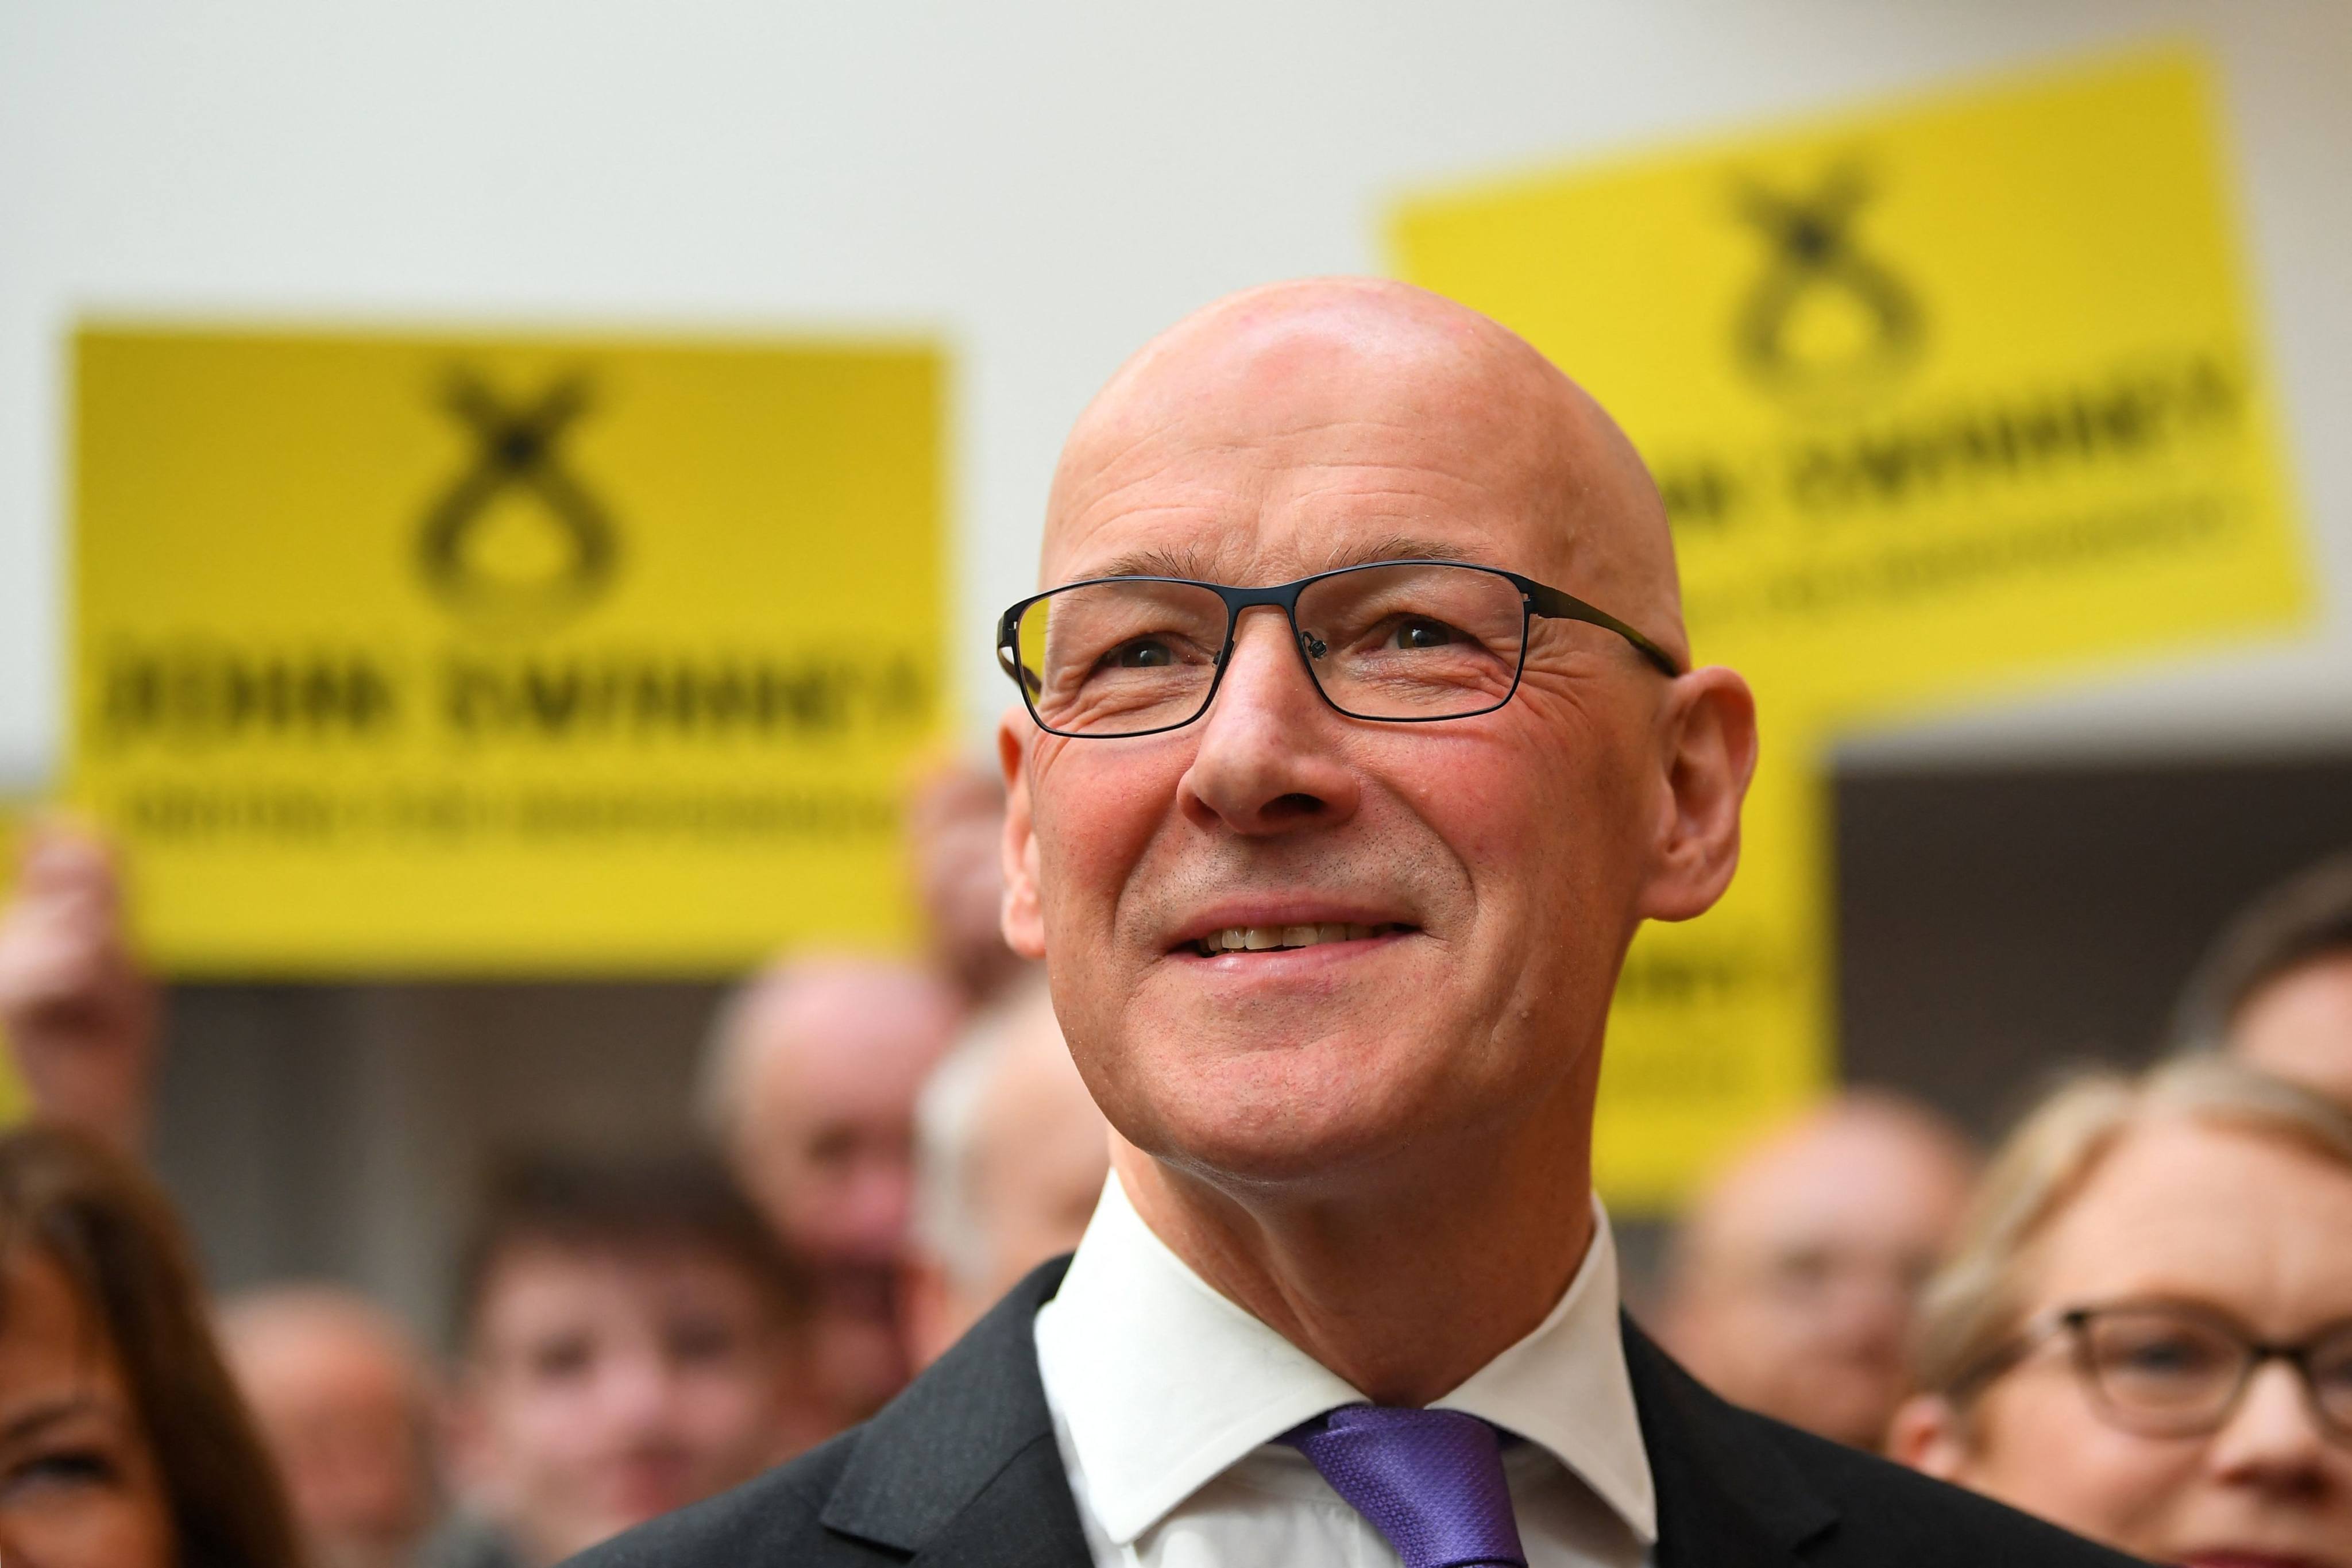 Scottish National Party veteran John Swinney was confirmed as the party’s new leader on Monday, set to succeed Humza Yousaf as the country’s first minister after he emerged as the sole contender in the leadership race. Photo: AFP